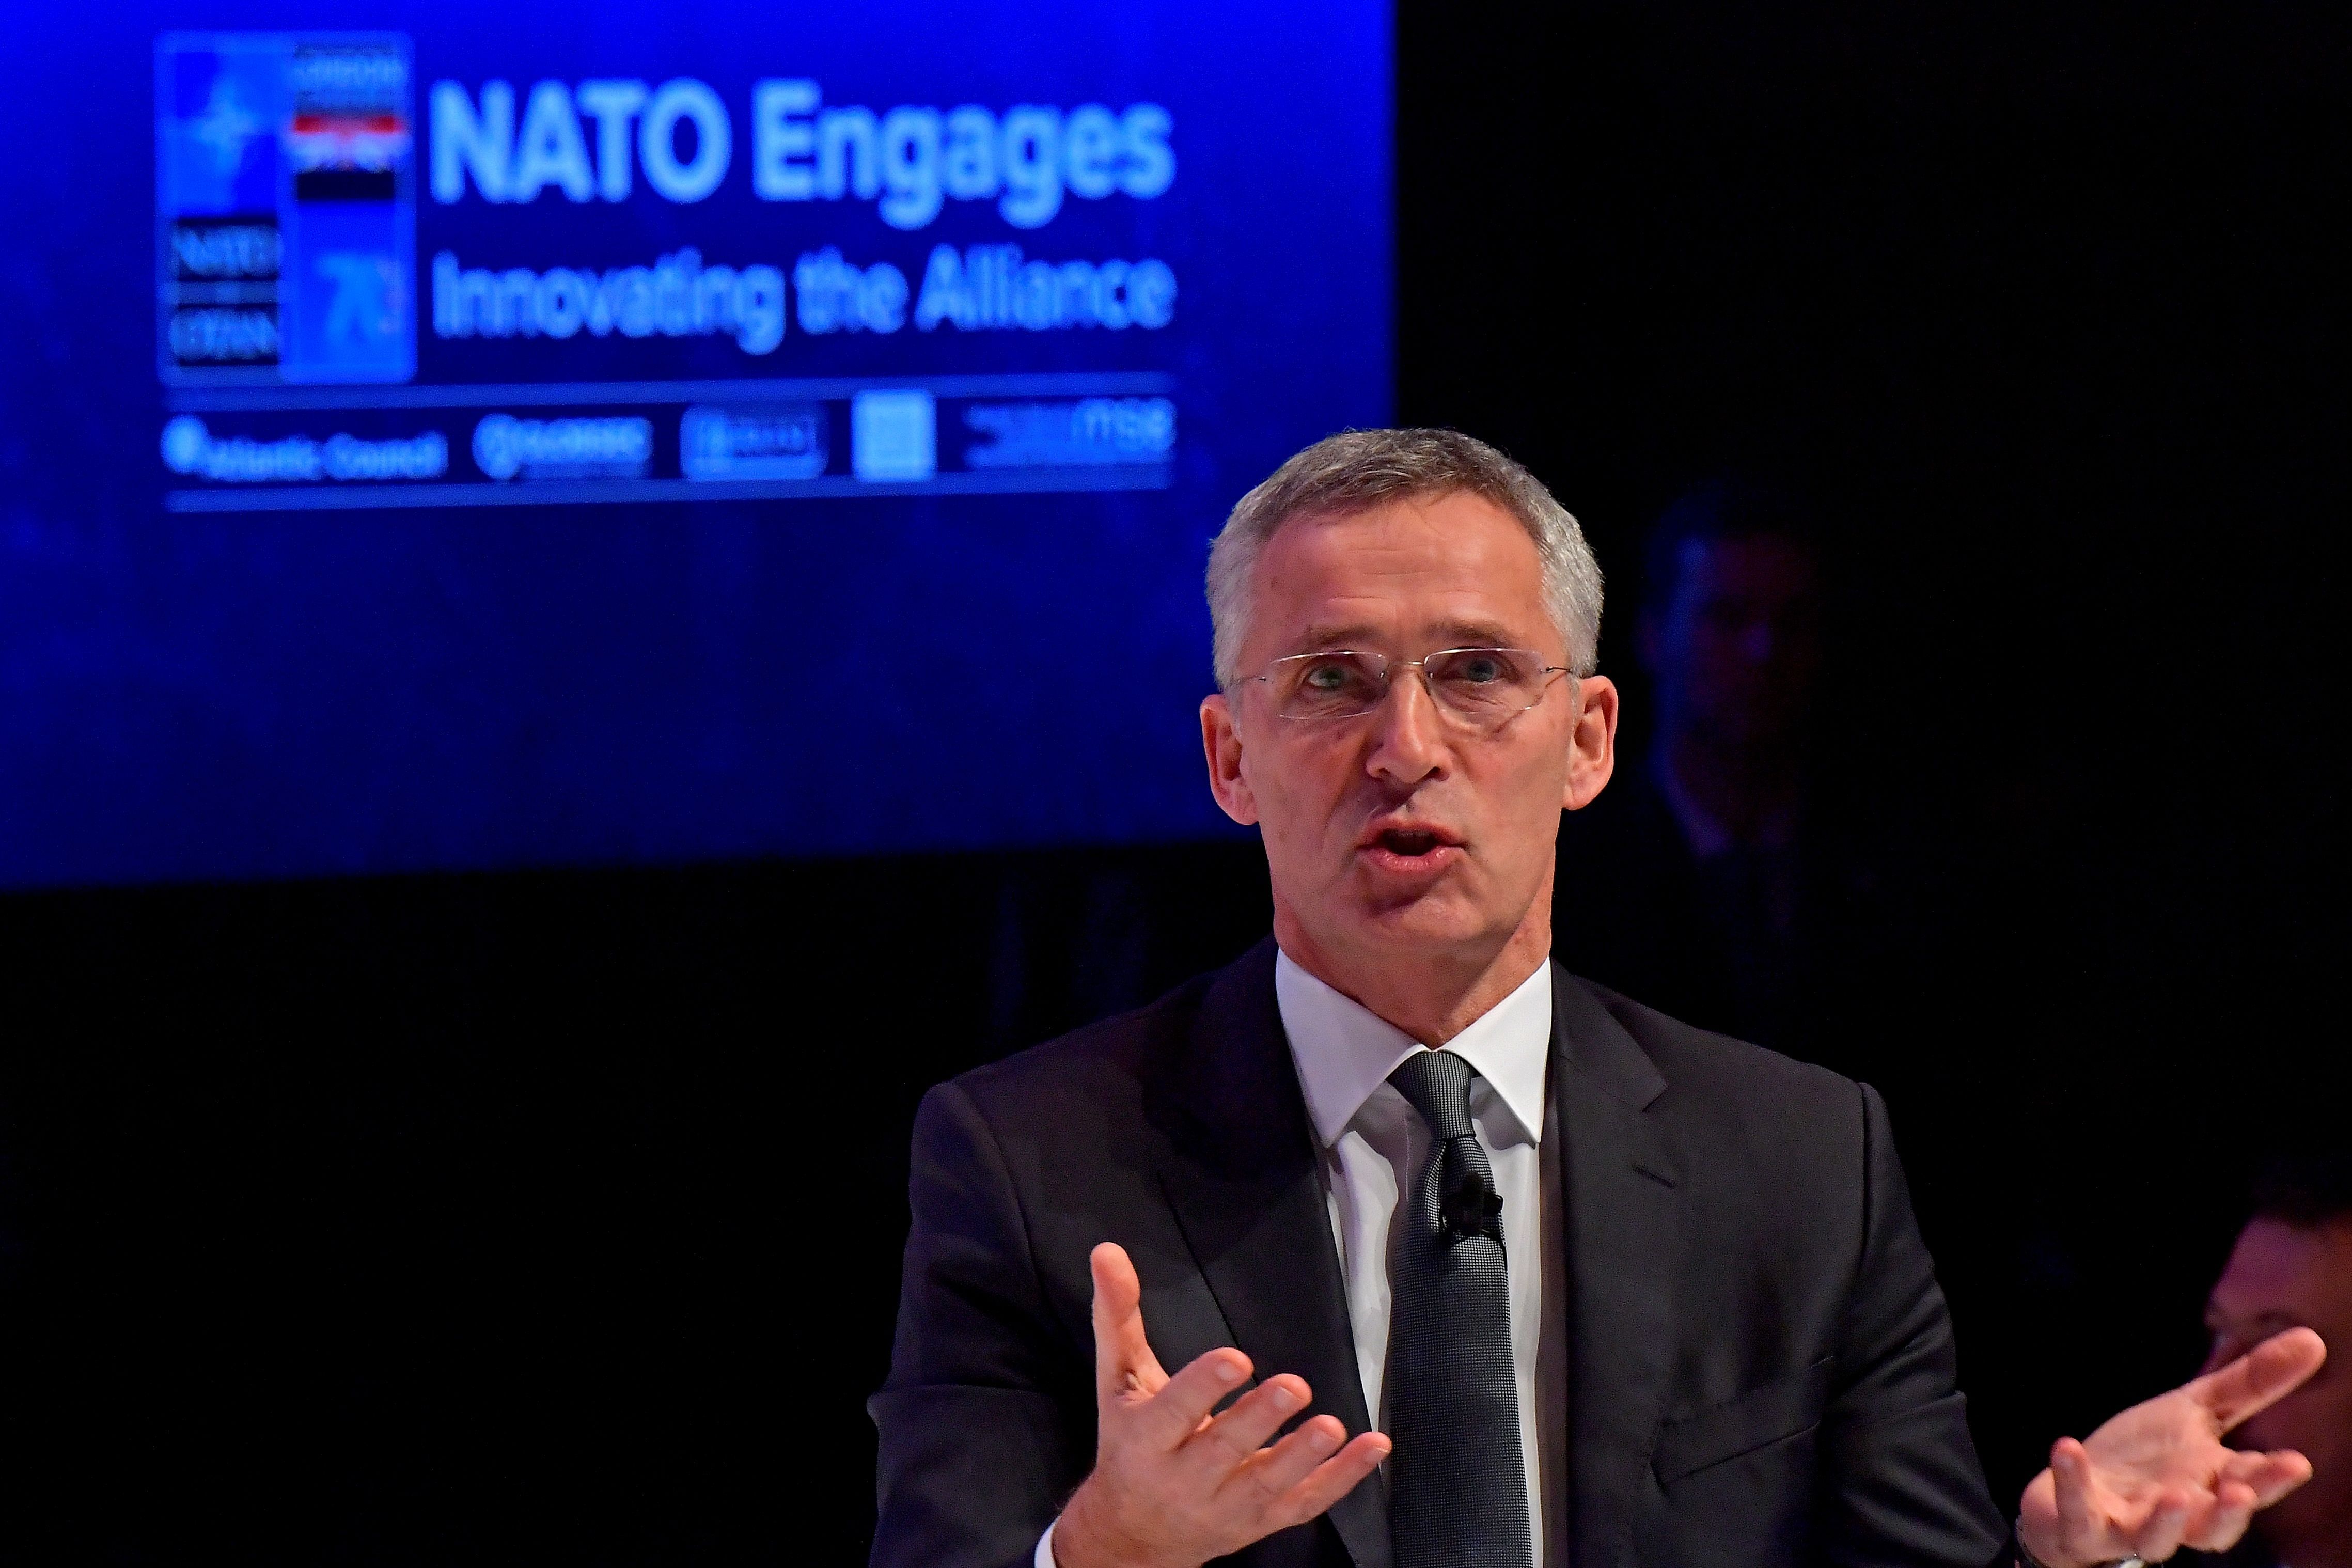 Nato Secretary General Jens Stoltenberg speaks at the official NATO outreach event. (AFP Photo)